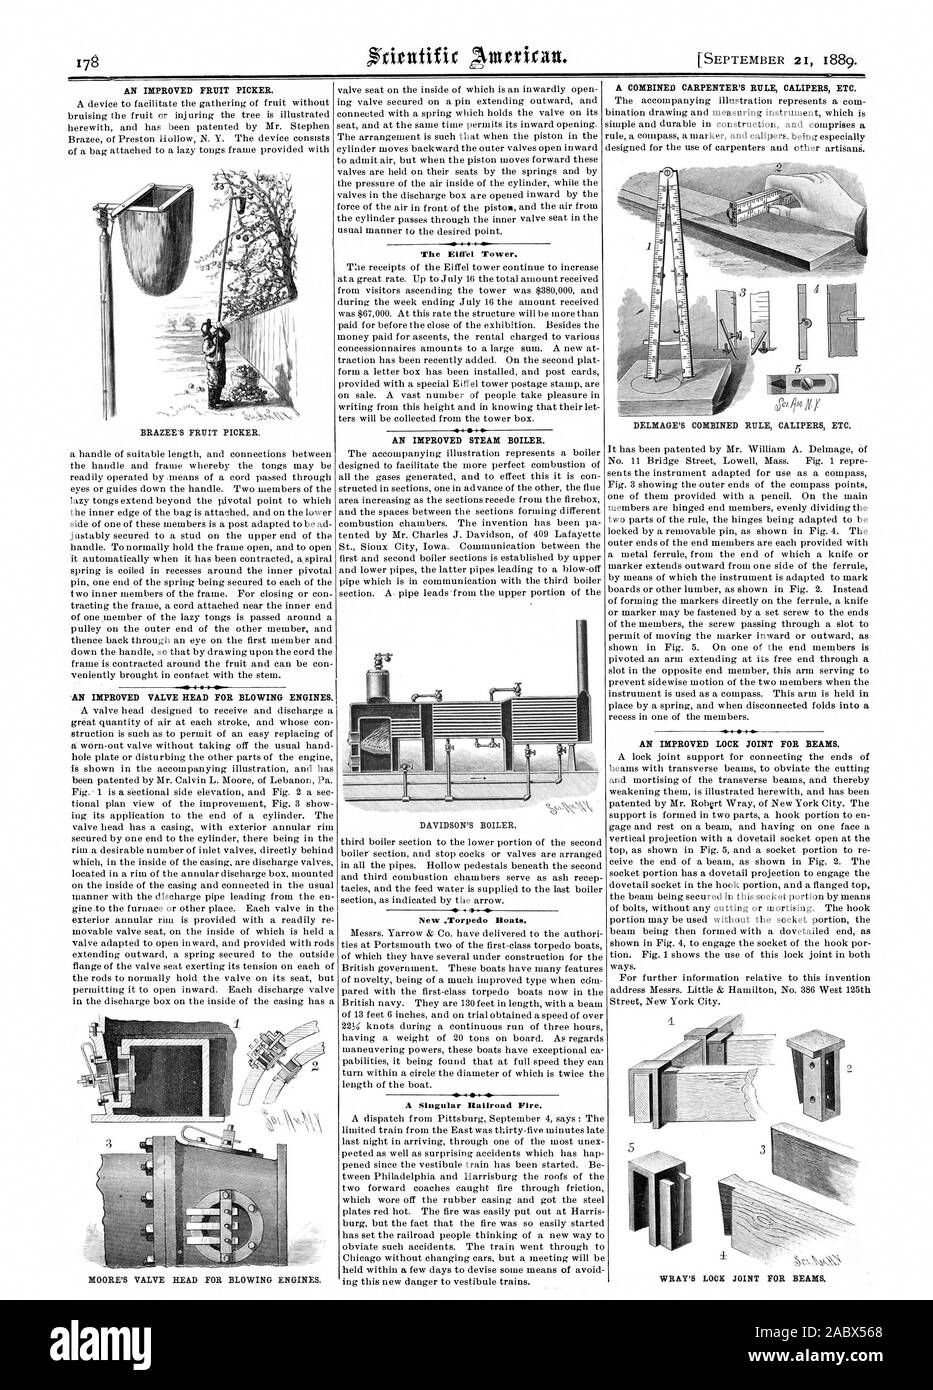 AN IMPROVED FRUIT PICKER. BRAZEE'S FRUIT PICKER AN IMPROVED VALVE HEAD FOR BLOWING ENGINES. MOORE'S VALVE READ FOR BLOWING ENGINES. The Eiffel Tower. 4  AN IMPROVED STEAM BOILER. New .Torpedo Boats. A Singular Railroad Fire. A COMBINED CARPENTER'S RULE CALIPERS ETC. DELDIAGE'S COMBINED RULE CALIPERS ETC. AN IMPROVED LOCK JOINT FOR BEAMS. WRAY'S LOCK JOINT FOR BEAMS. DAVIDSON'S BOILER.  1889 SCIENTIFIC AMERICAN INC., 1889-09-21 Stock Photo